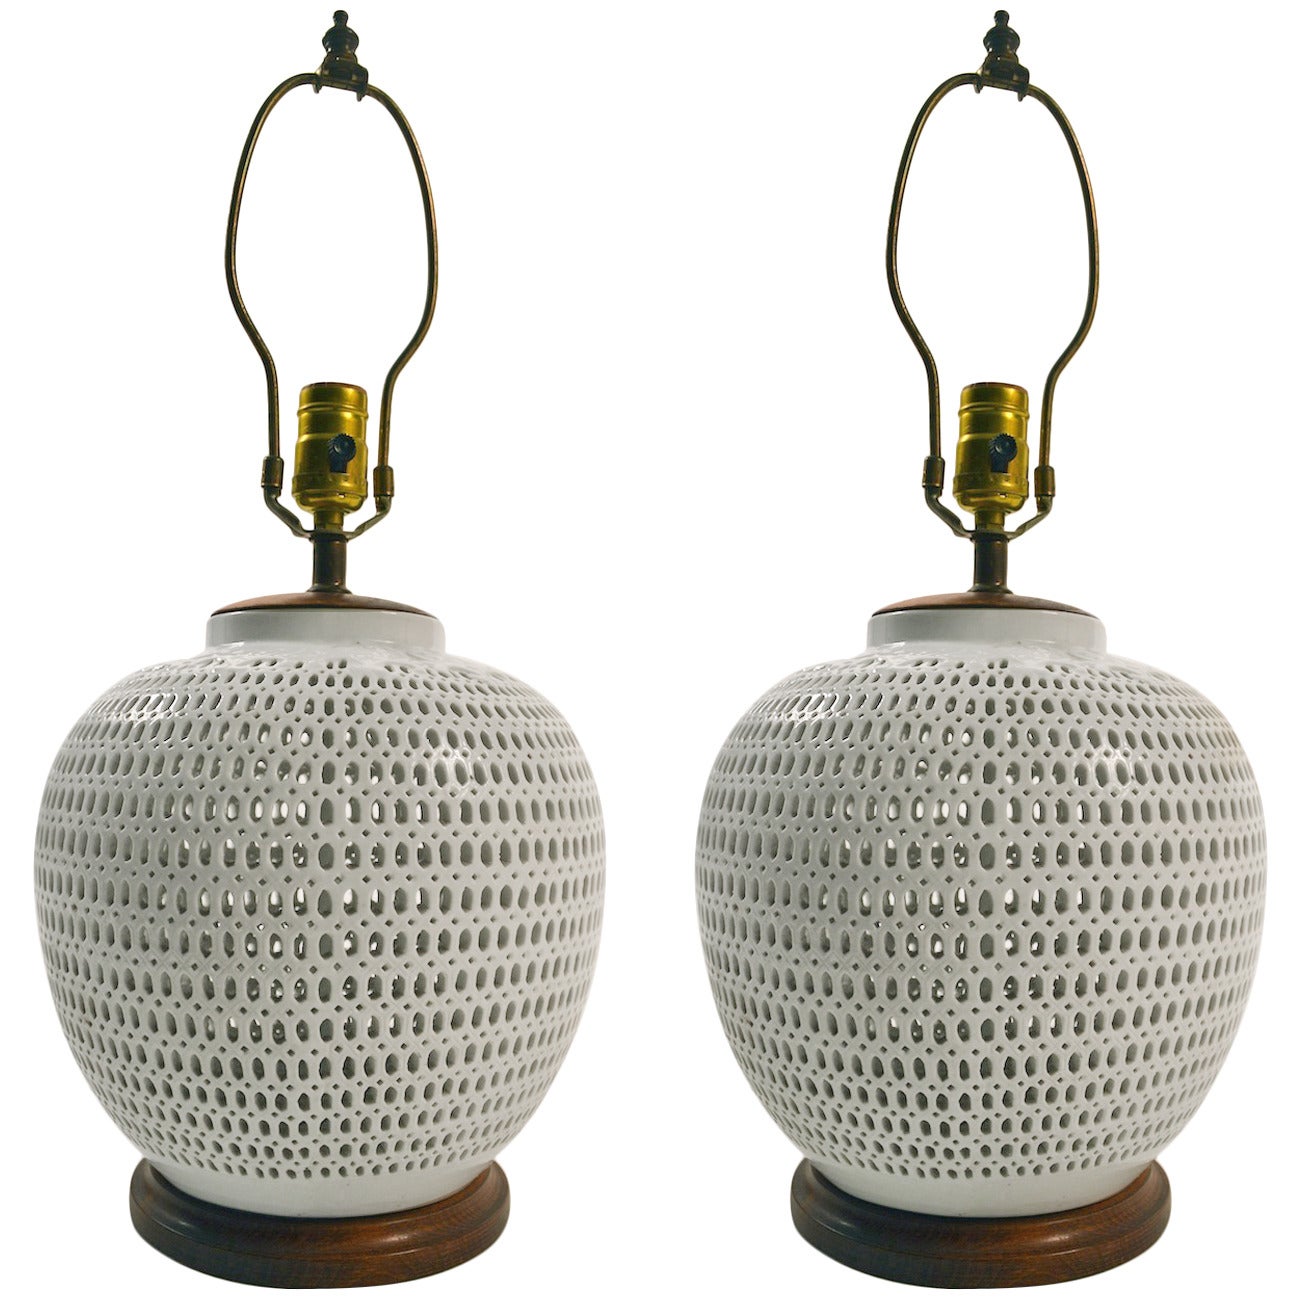 Pair of Reticulated Blanc de Chine Table Lamps